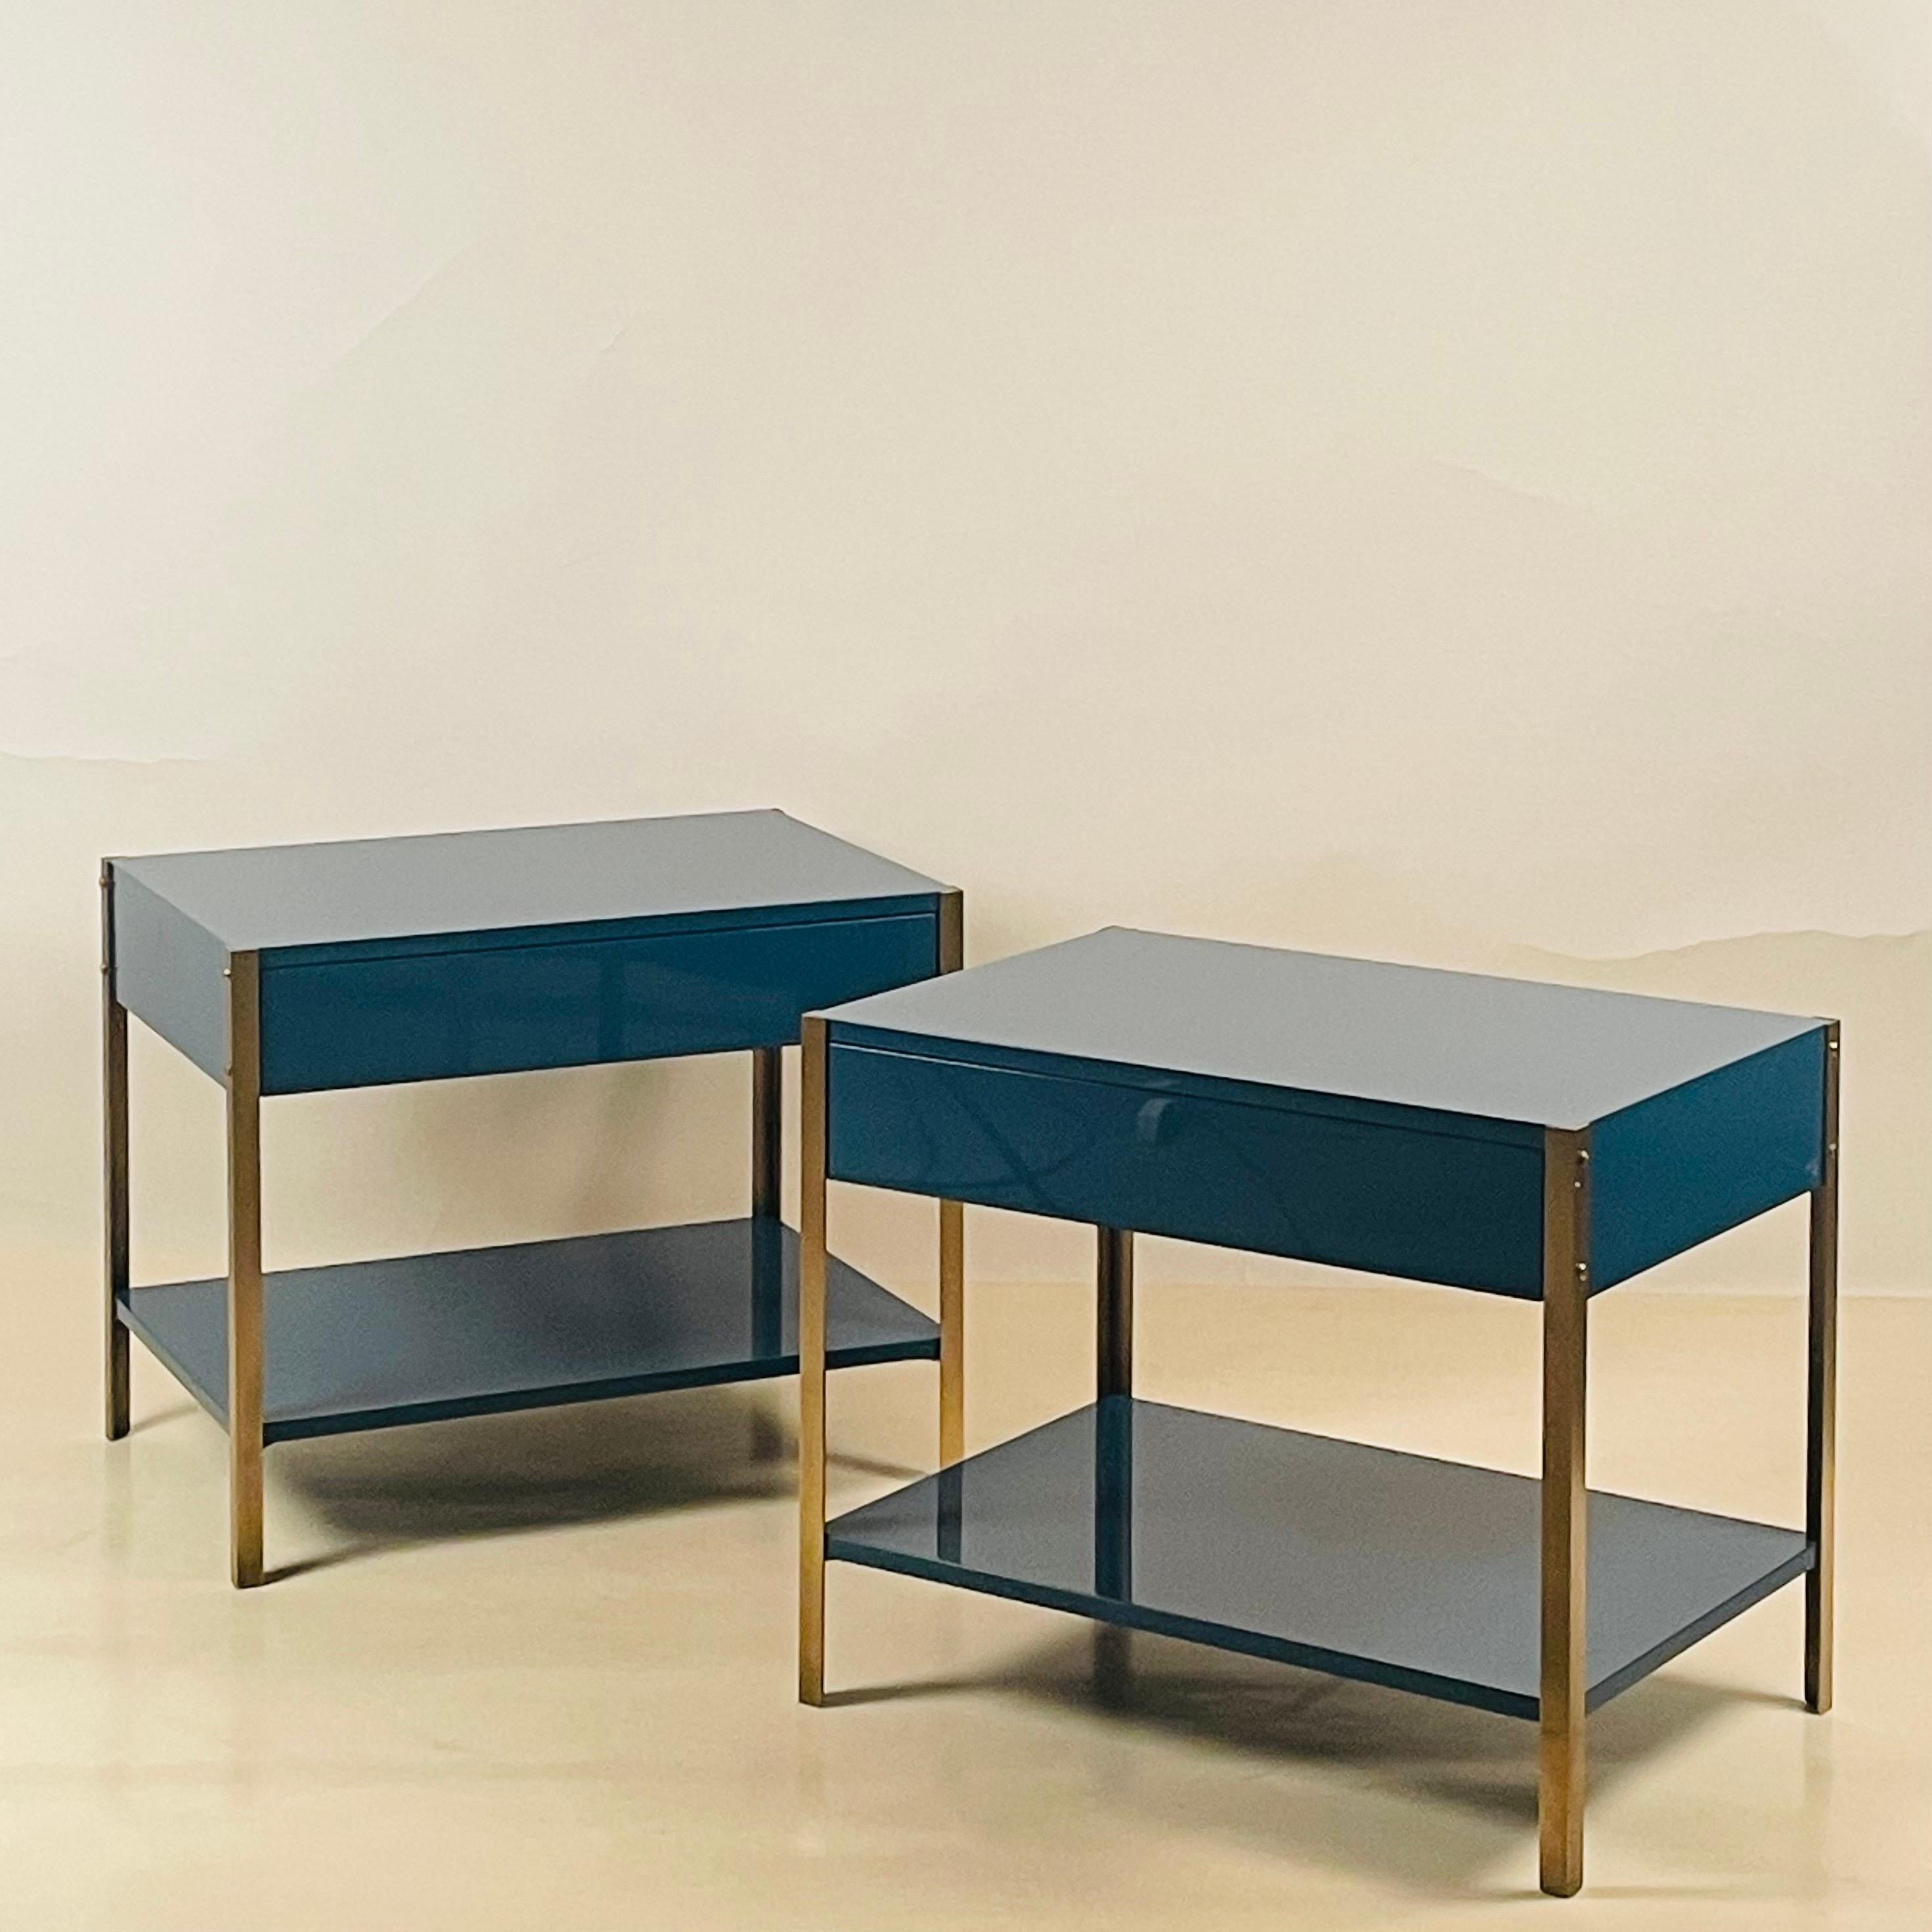 Pair of chic custom color lacquer and brushed brass nightstands in the style of Maison Jansen. Hard lacquer finish with brushed solid brass legs.

Shown here in RAL 5007 high gloss lacquer.

Soft close drawers.